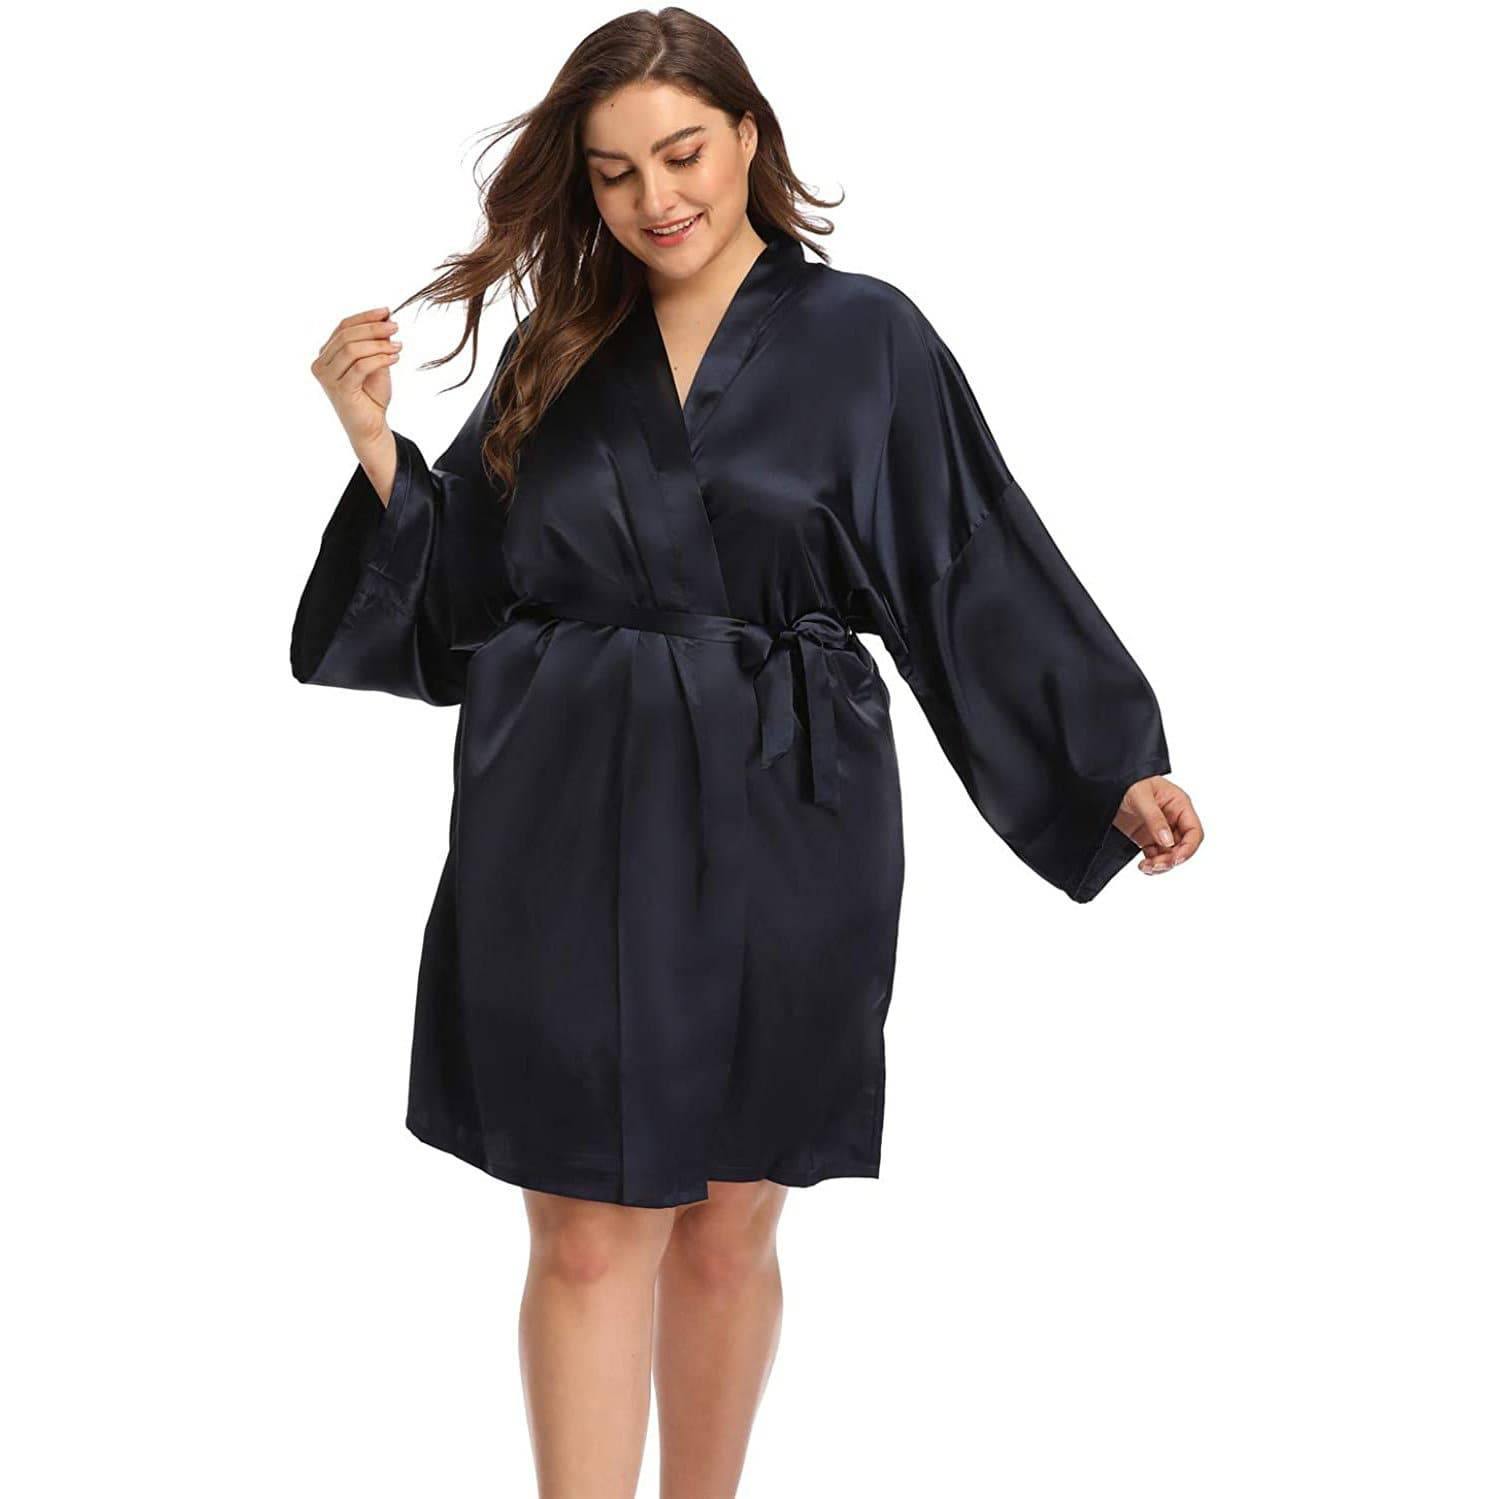 Plus Size Silk Robes For Women With Belt 100% Mulberry Silk Bathrobes